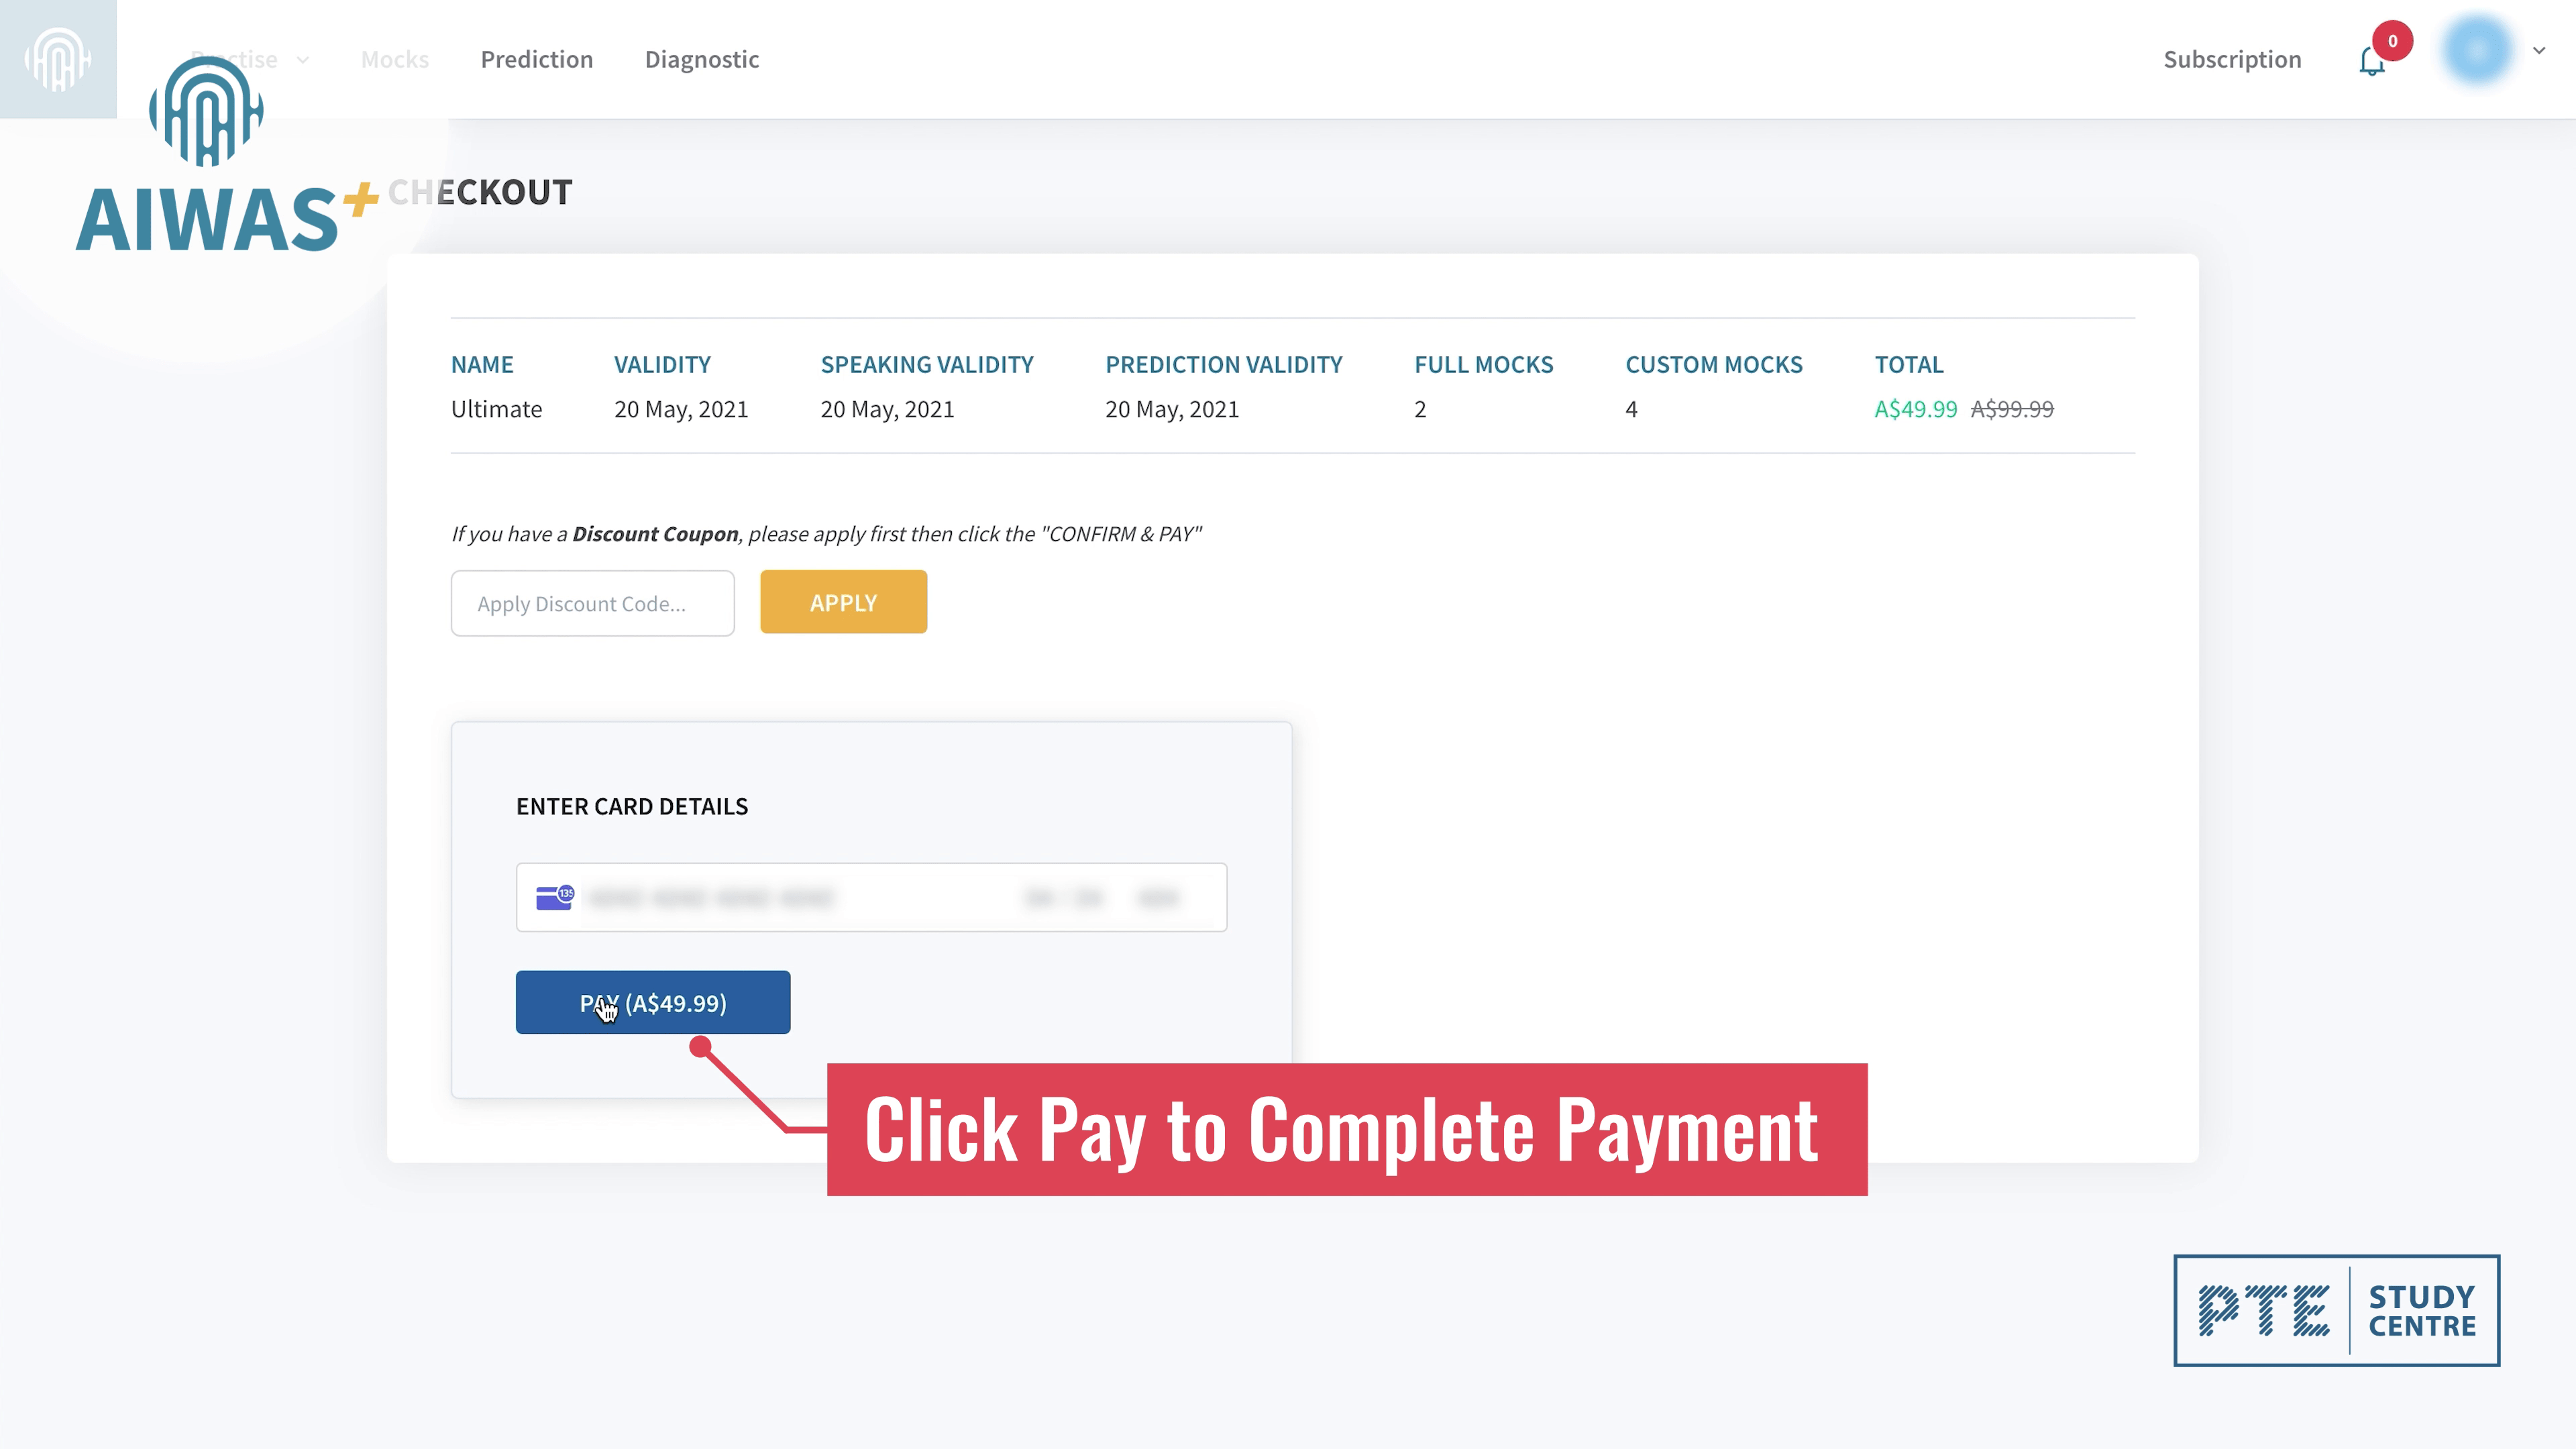 Click Pay